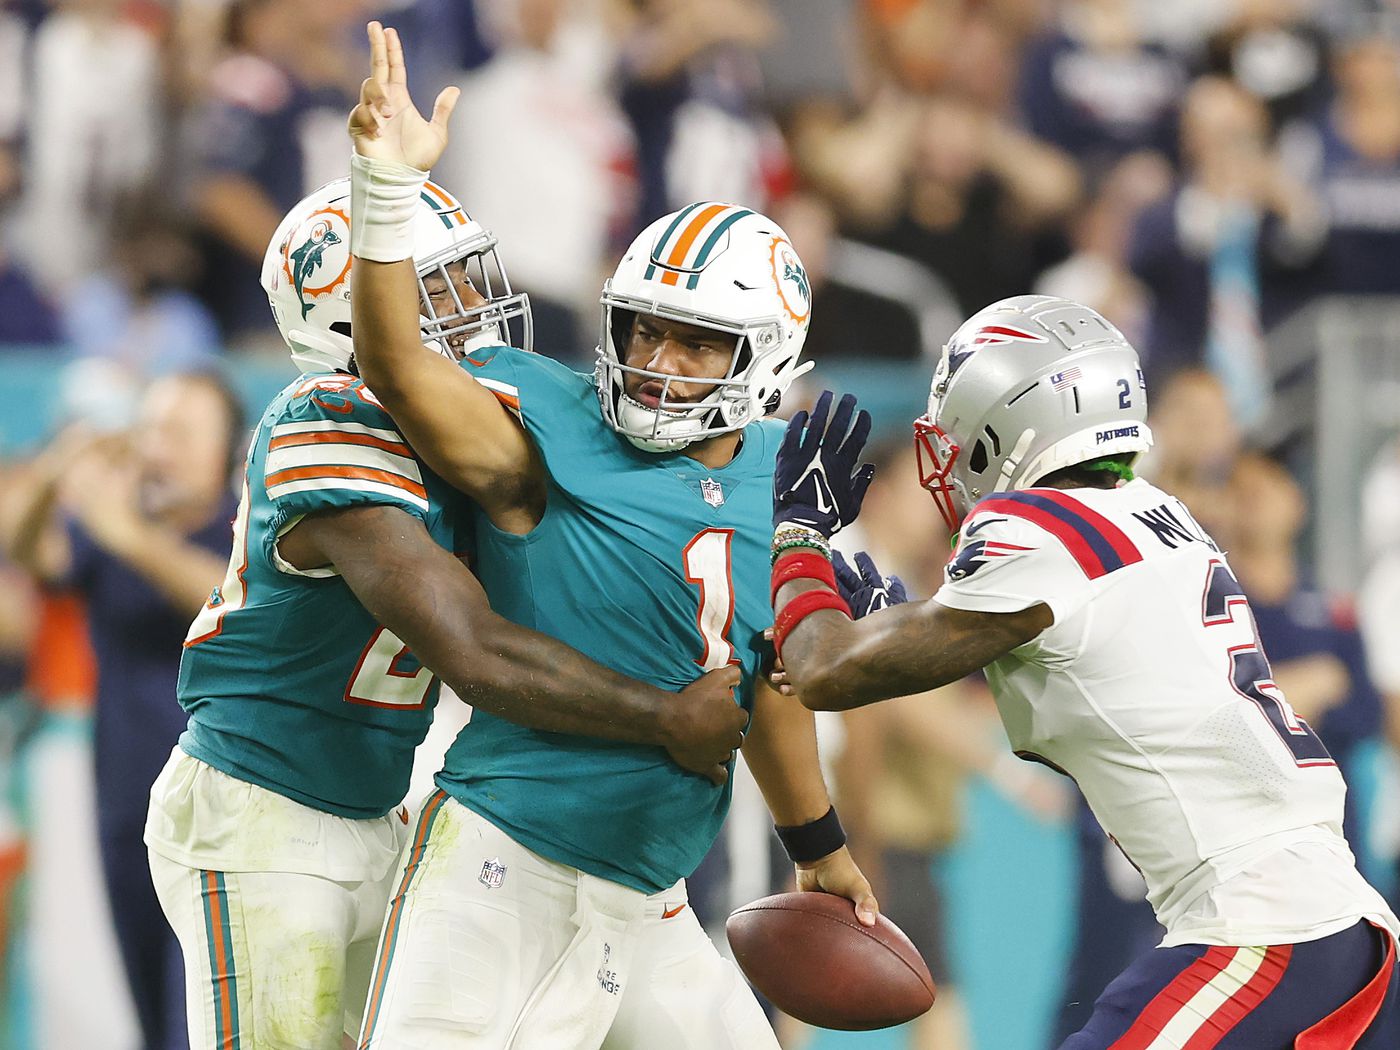 Miami Dolphins 2022 Football Schedule Dolphins 2022 Schedule: Opponents Set For Next Year - The Phinsider